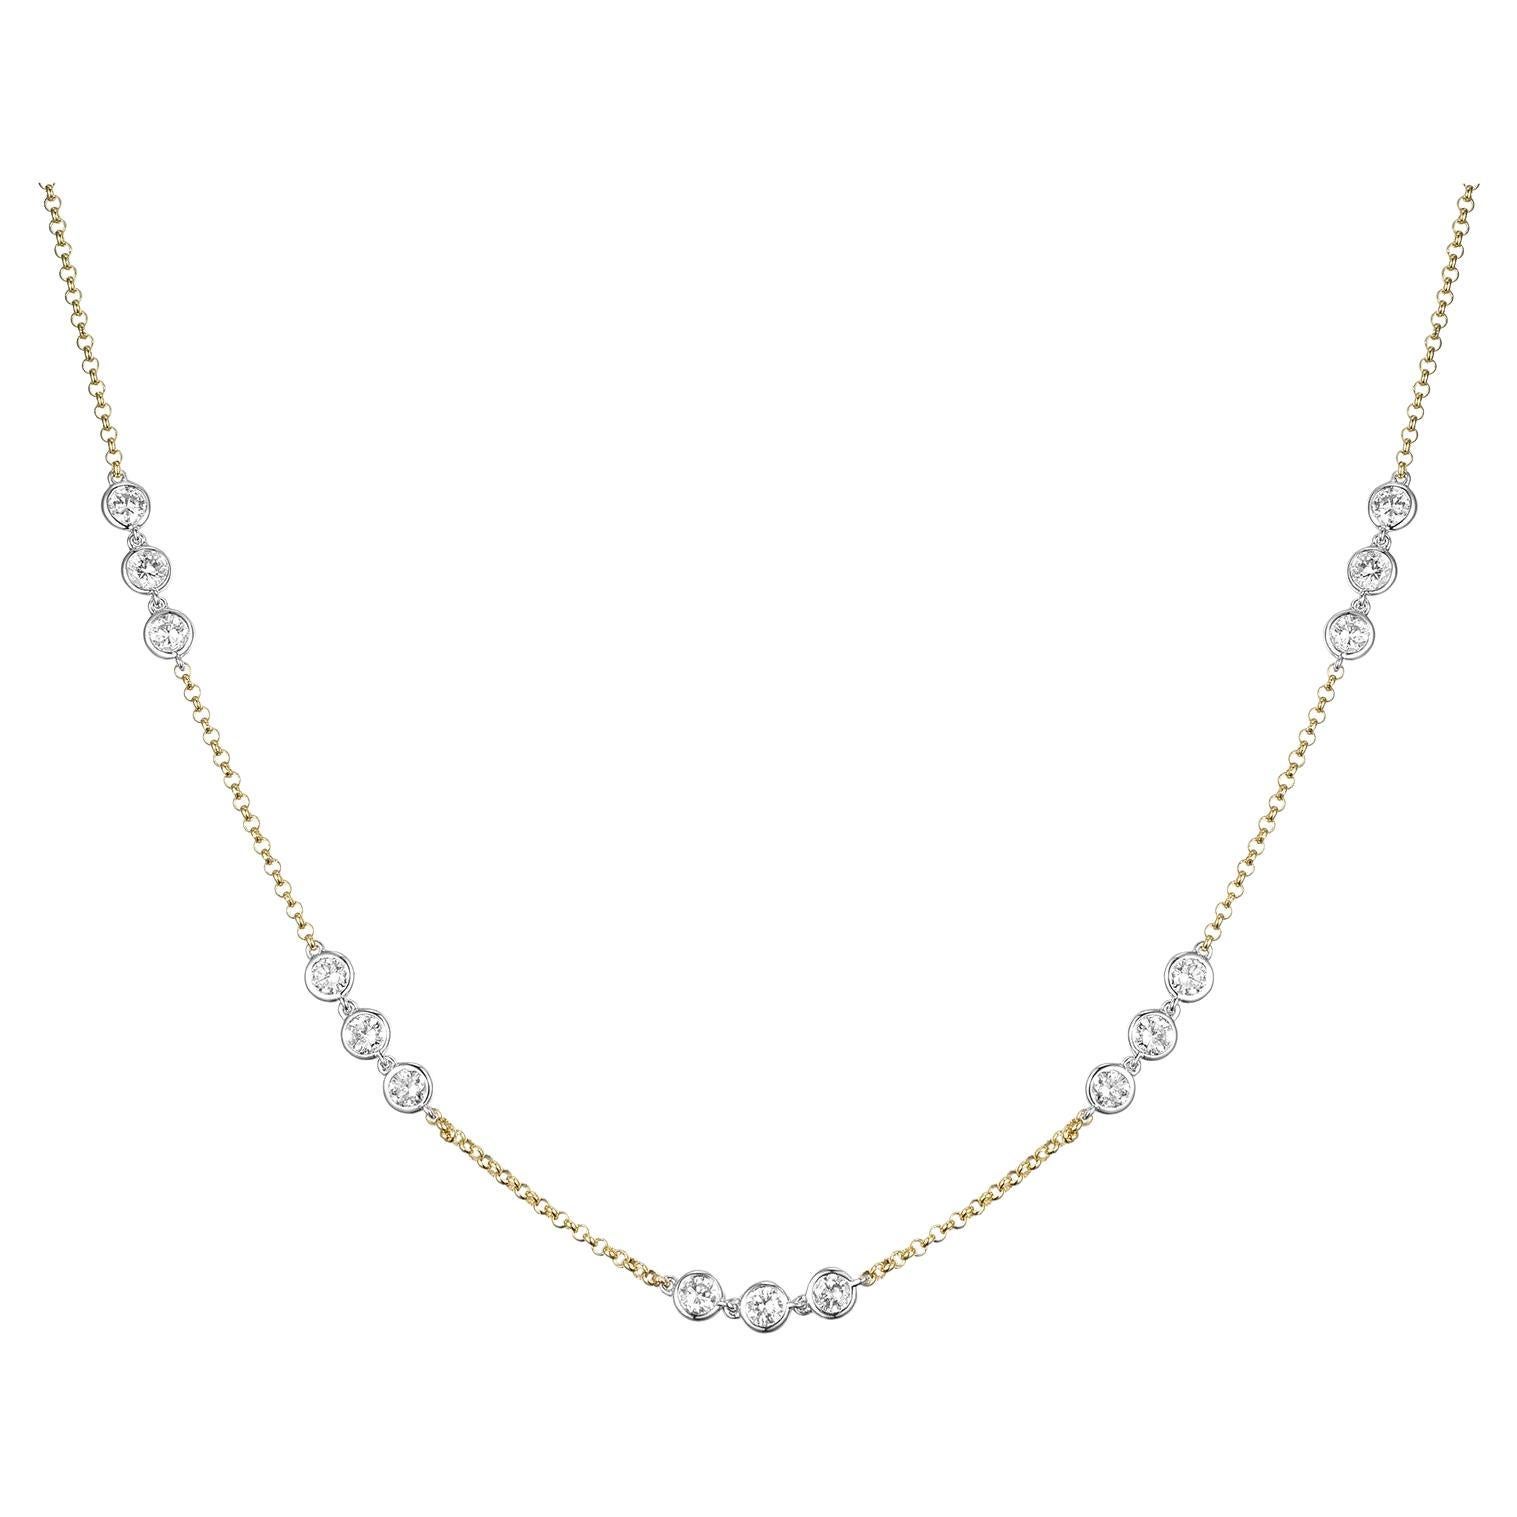 3.6 Carat 29-Station Diamond by The Yard Necklace in 18 Karat Gold For Sale